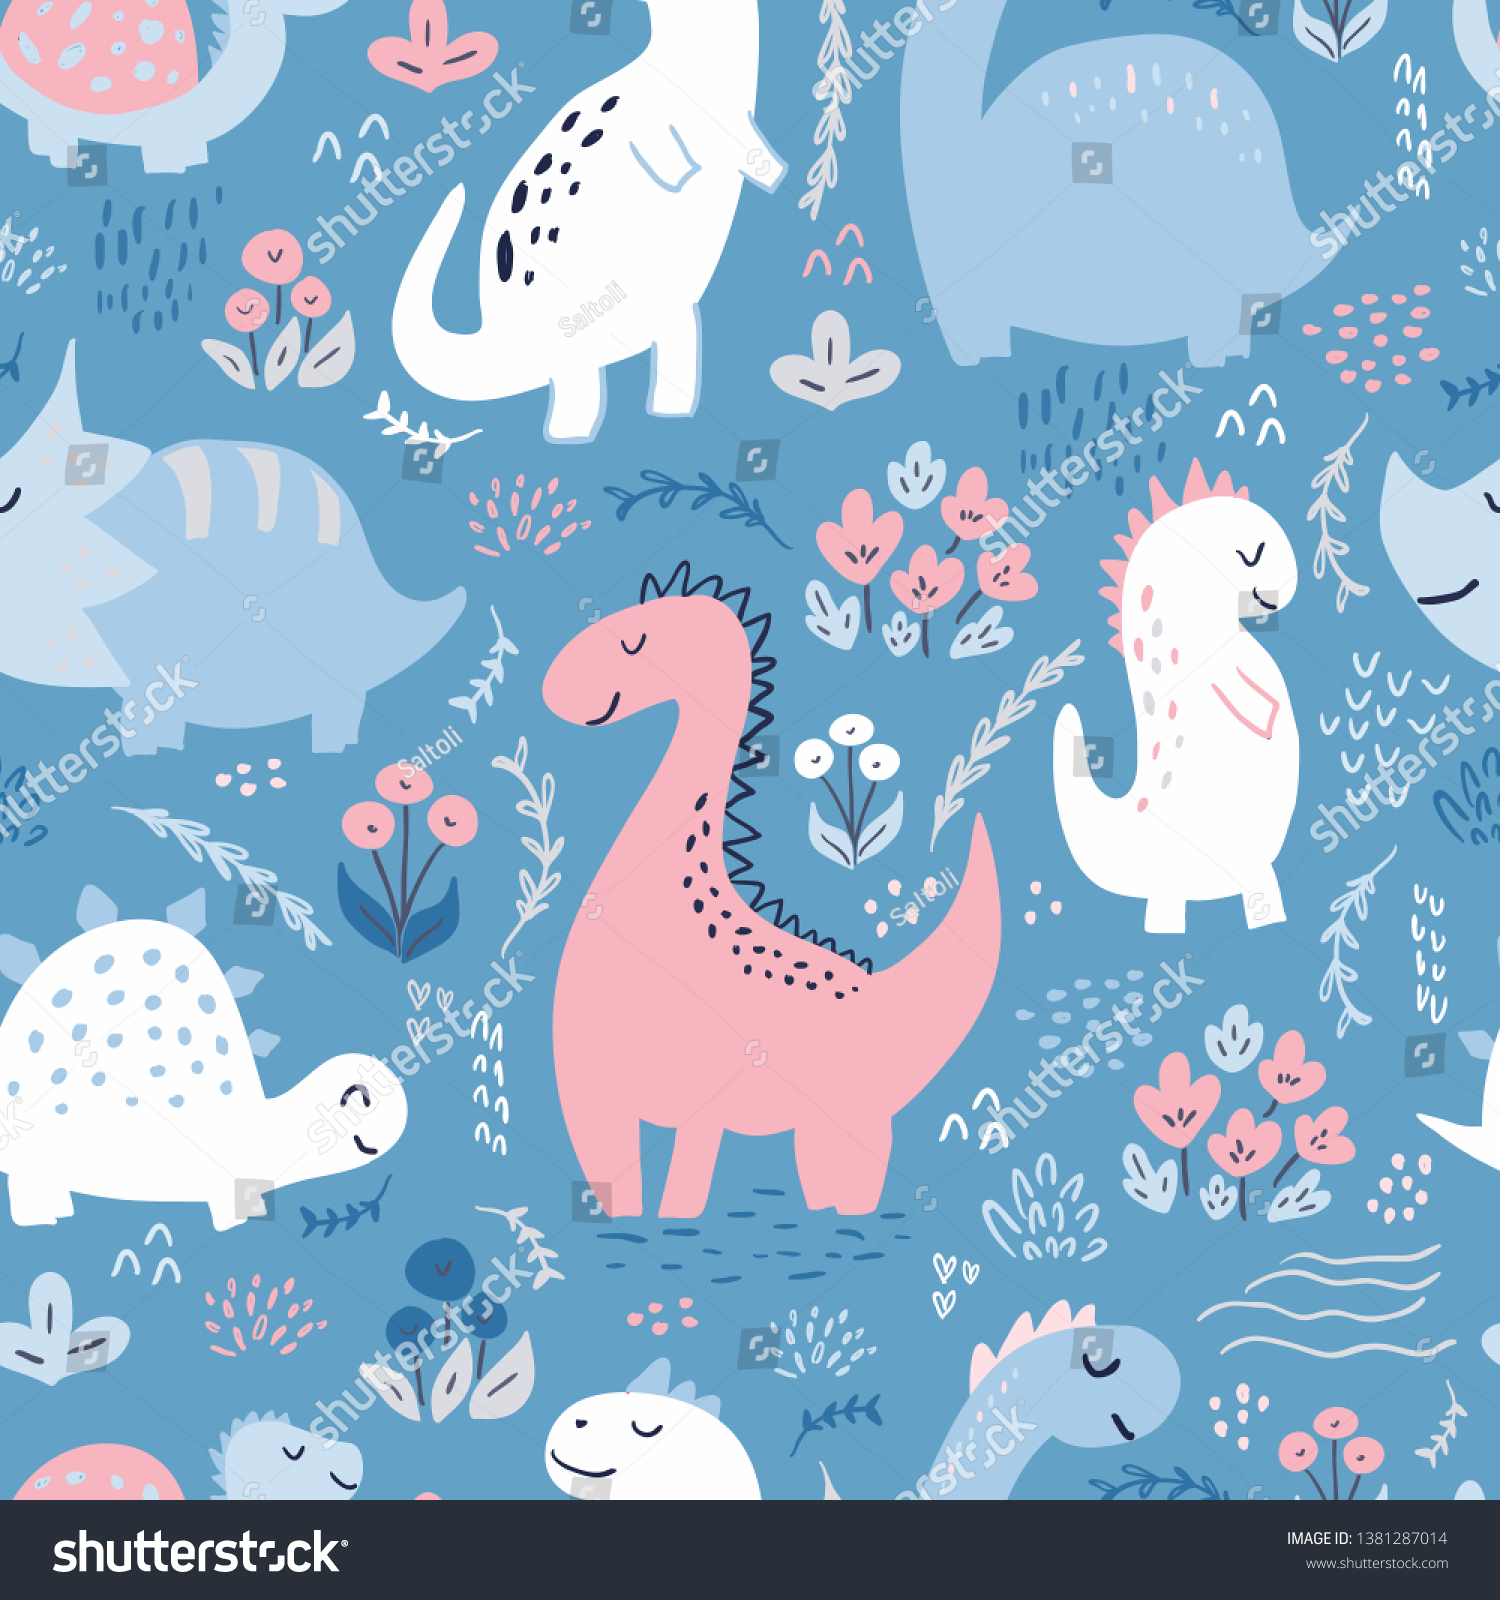 Seamless pattern cute hand drawn dinosaurs stock vector royalty free